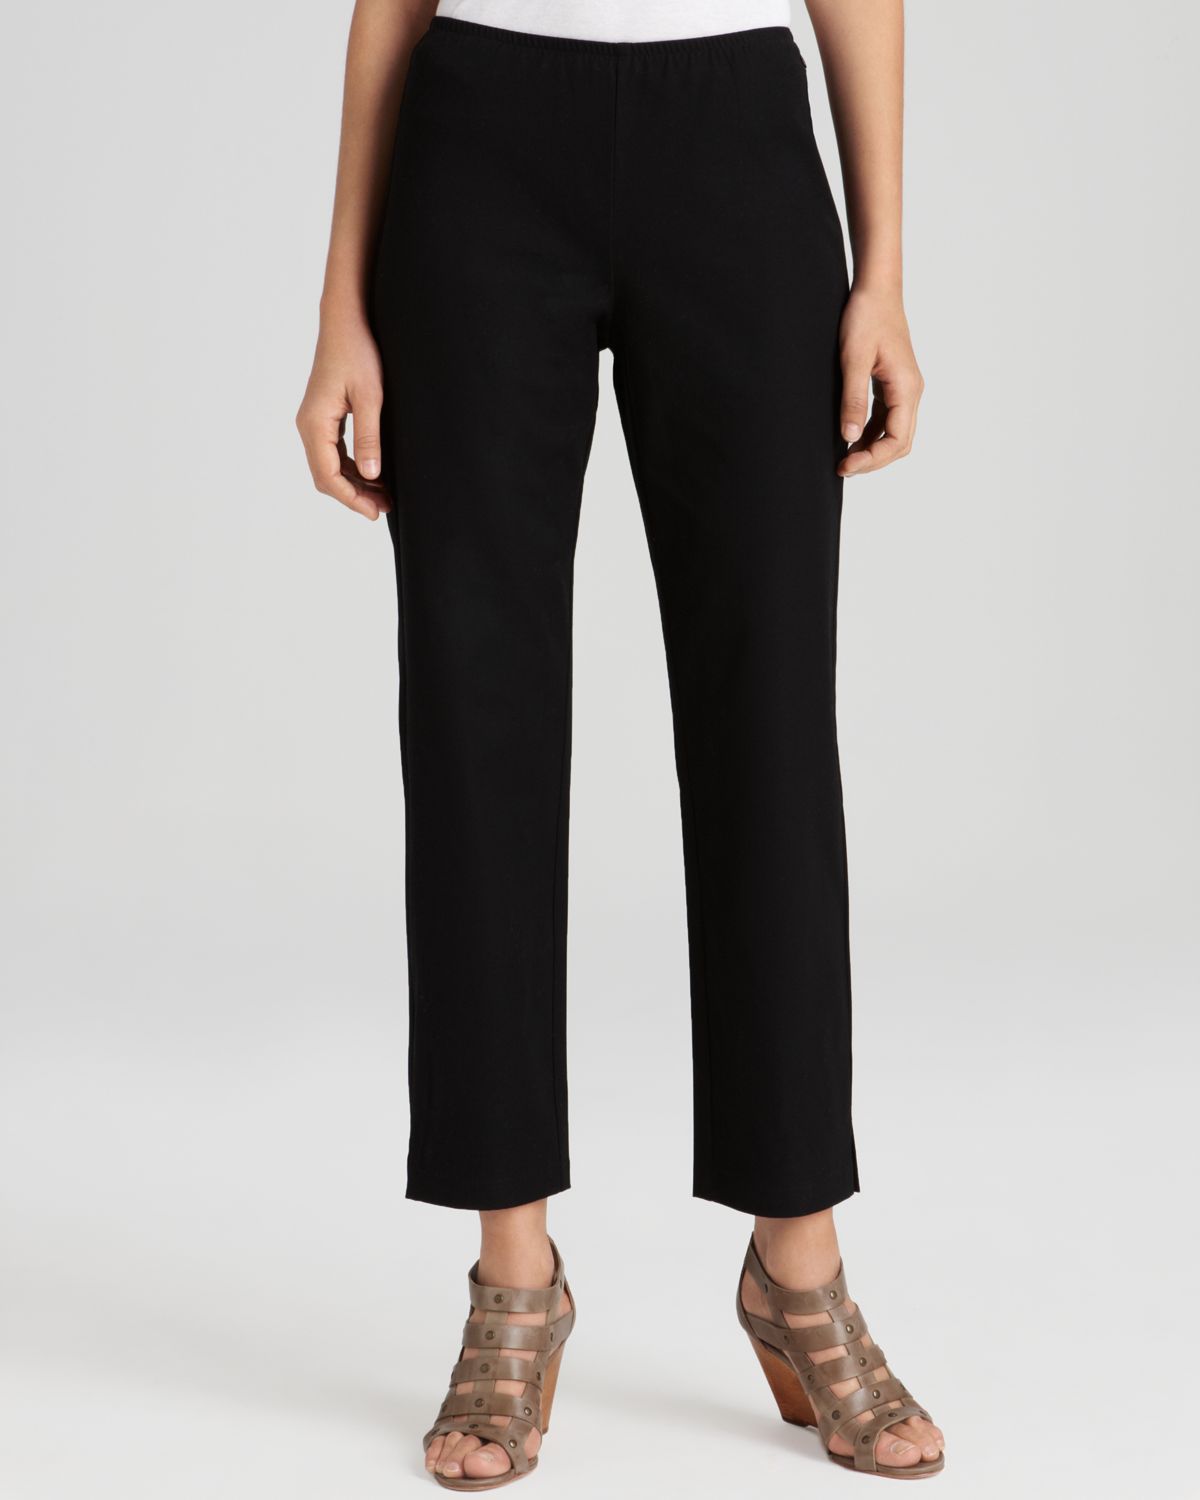 Eileen fisher Organic Stretch Cotton Twill Slim Ankle Pants in Black | Lyst